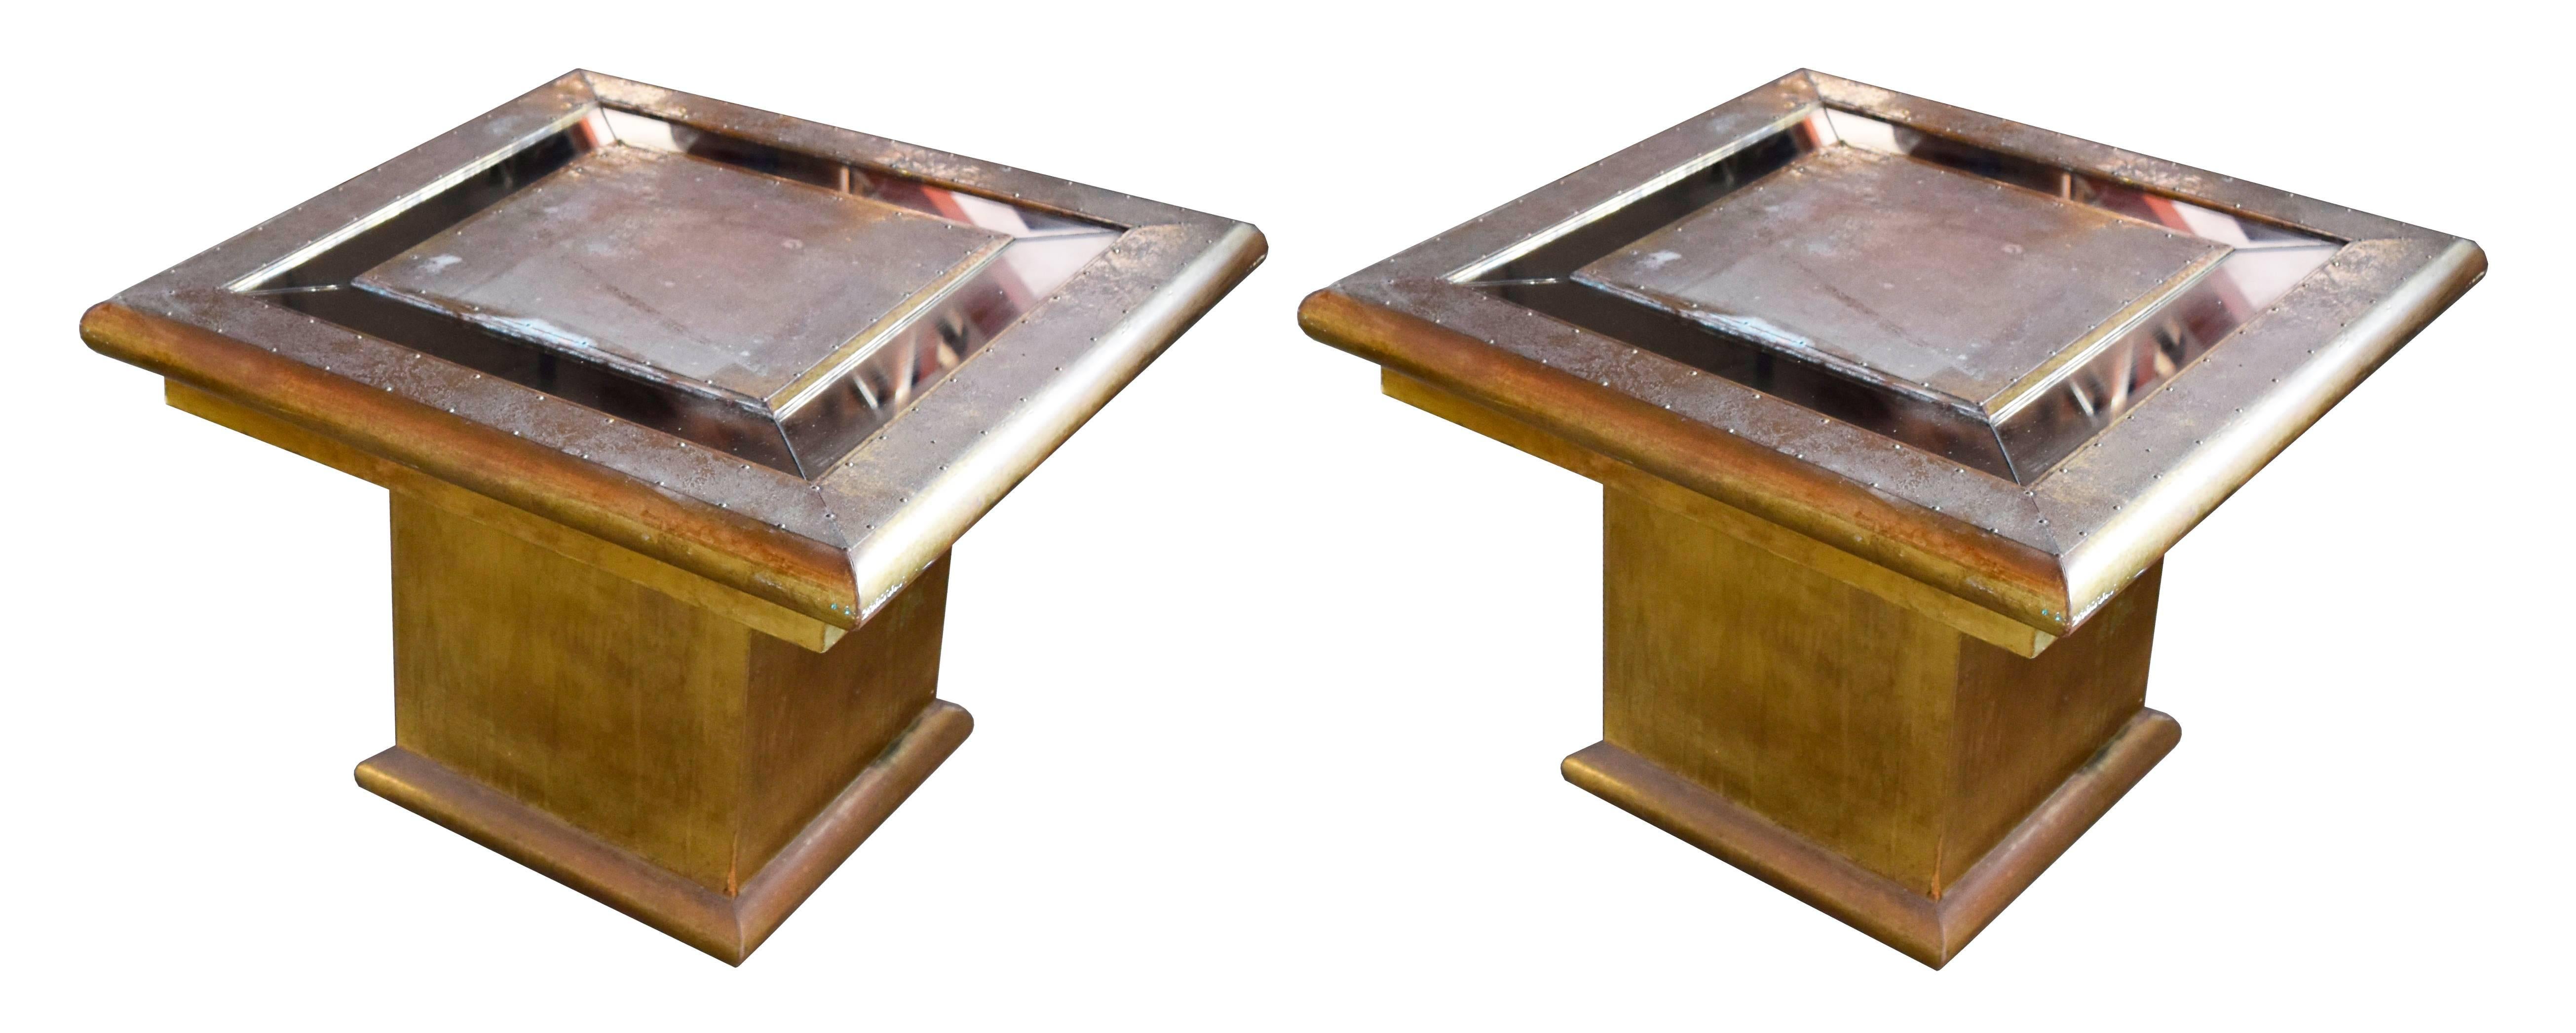 Handcrafted with fine brass sheets etched over a wooden frame and covered with smoked mirrors. 

Rodolfo Dubarry arrived in the seventies in Spain and worked tirelessly. His first special creation was the fireplace of the Menchú, the most